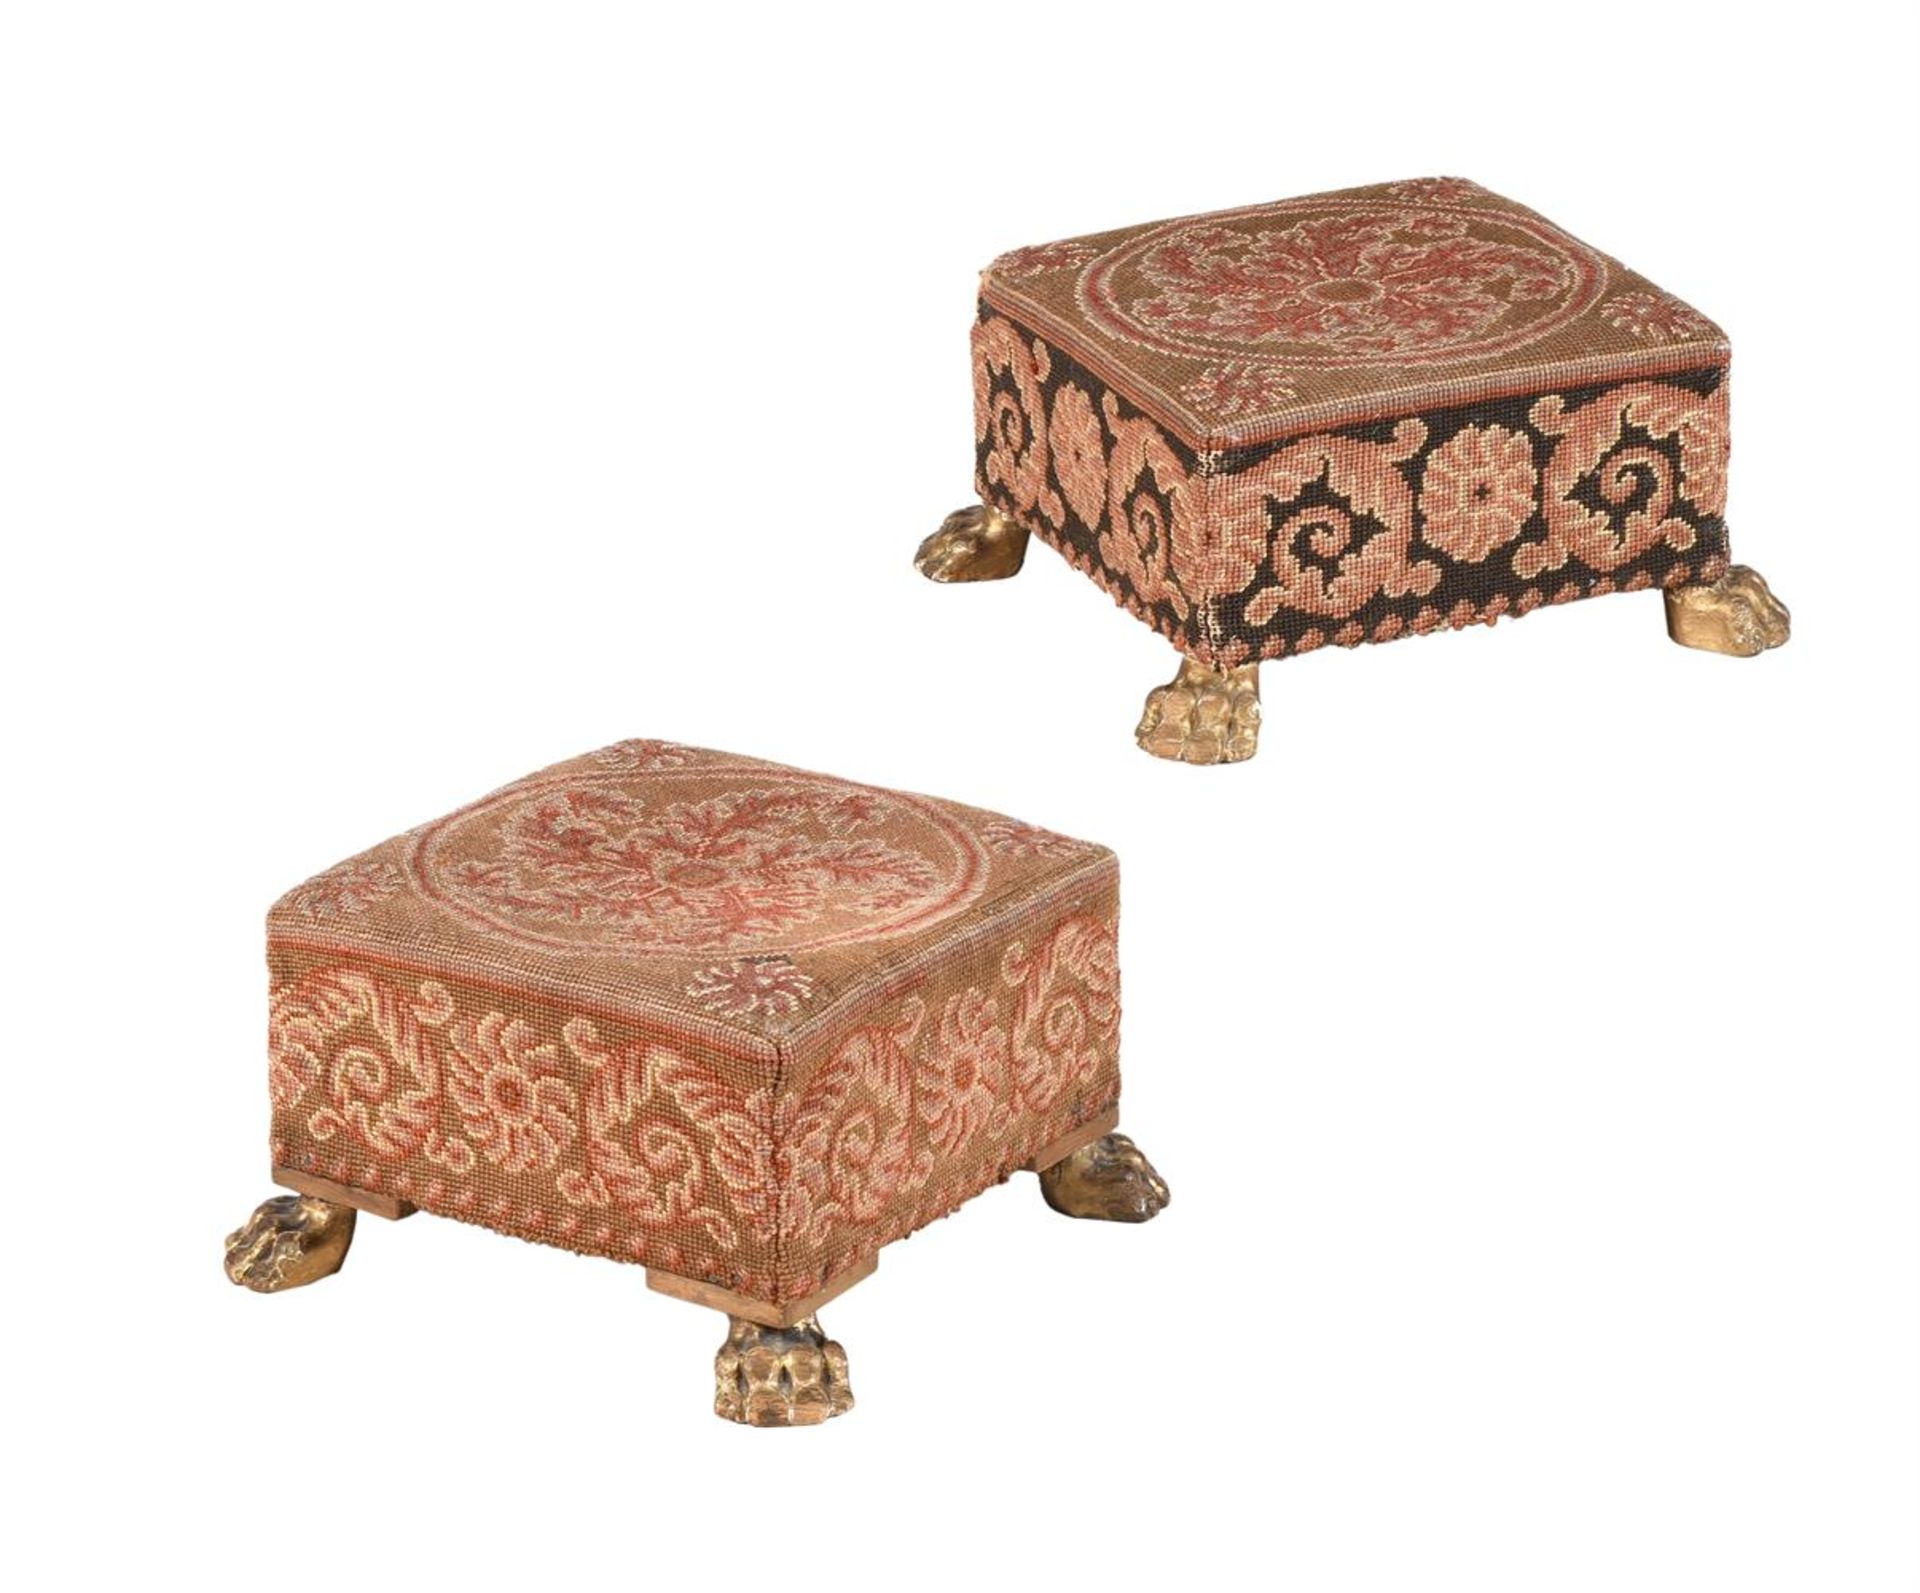 TWO SIMILAR NEEDLEWORK COVERED FOOT STOOLS INCORPORATING 19TH CENTURY AND LATER ELEMENTS